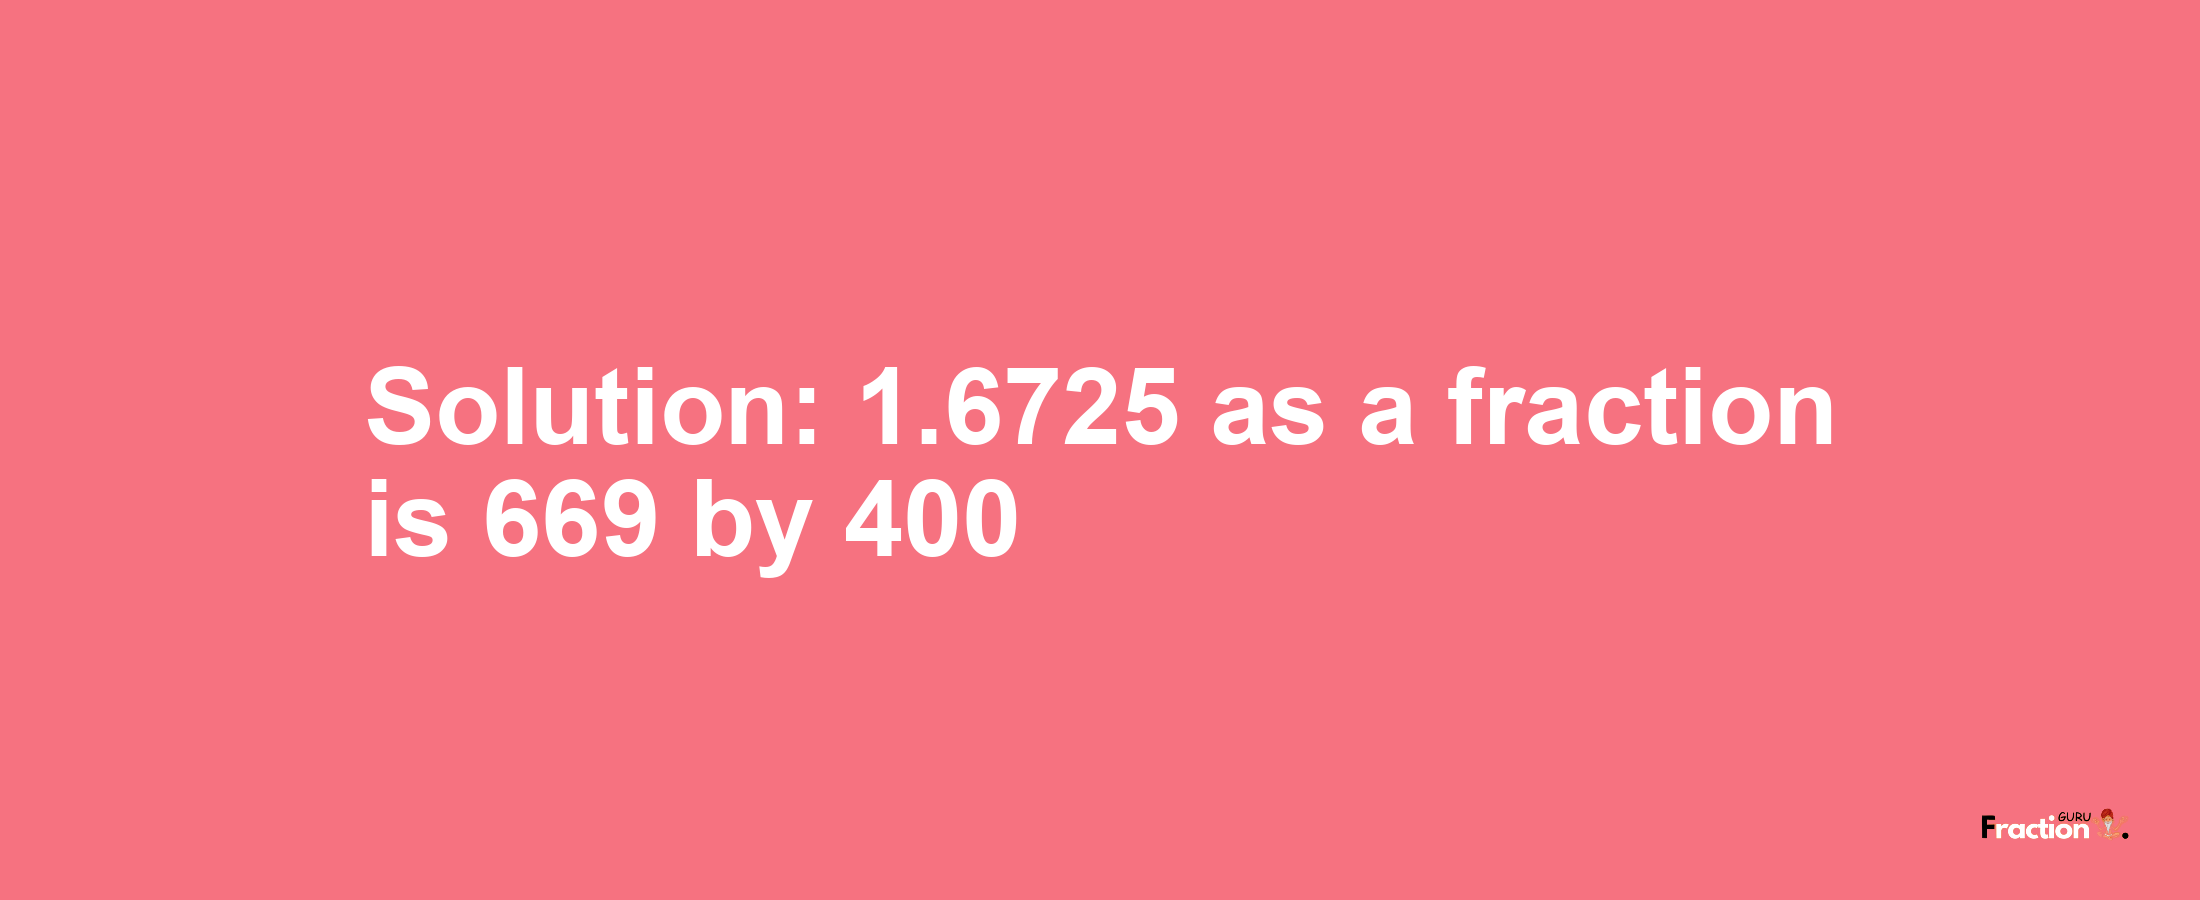 Solution:1.6725 as a fraction is 669/400